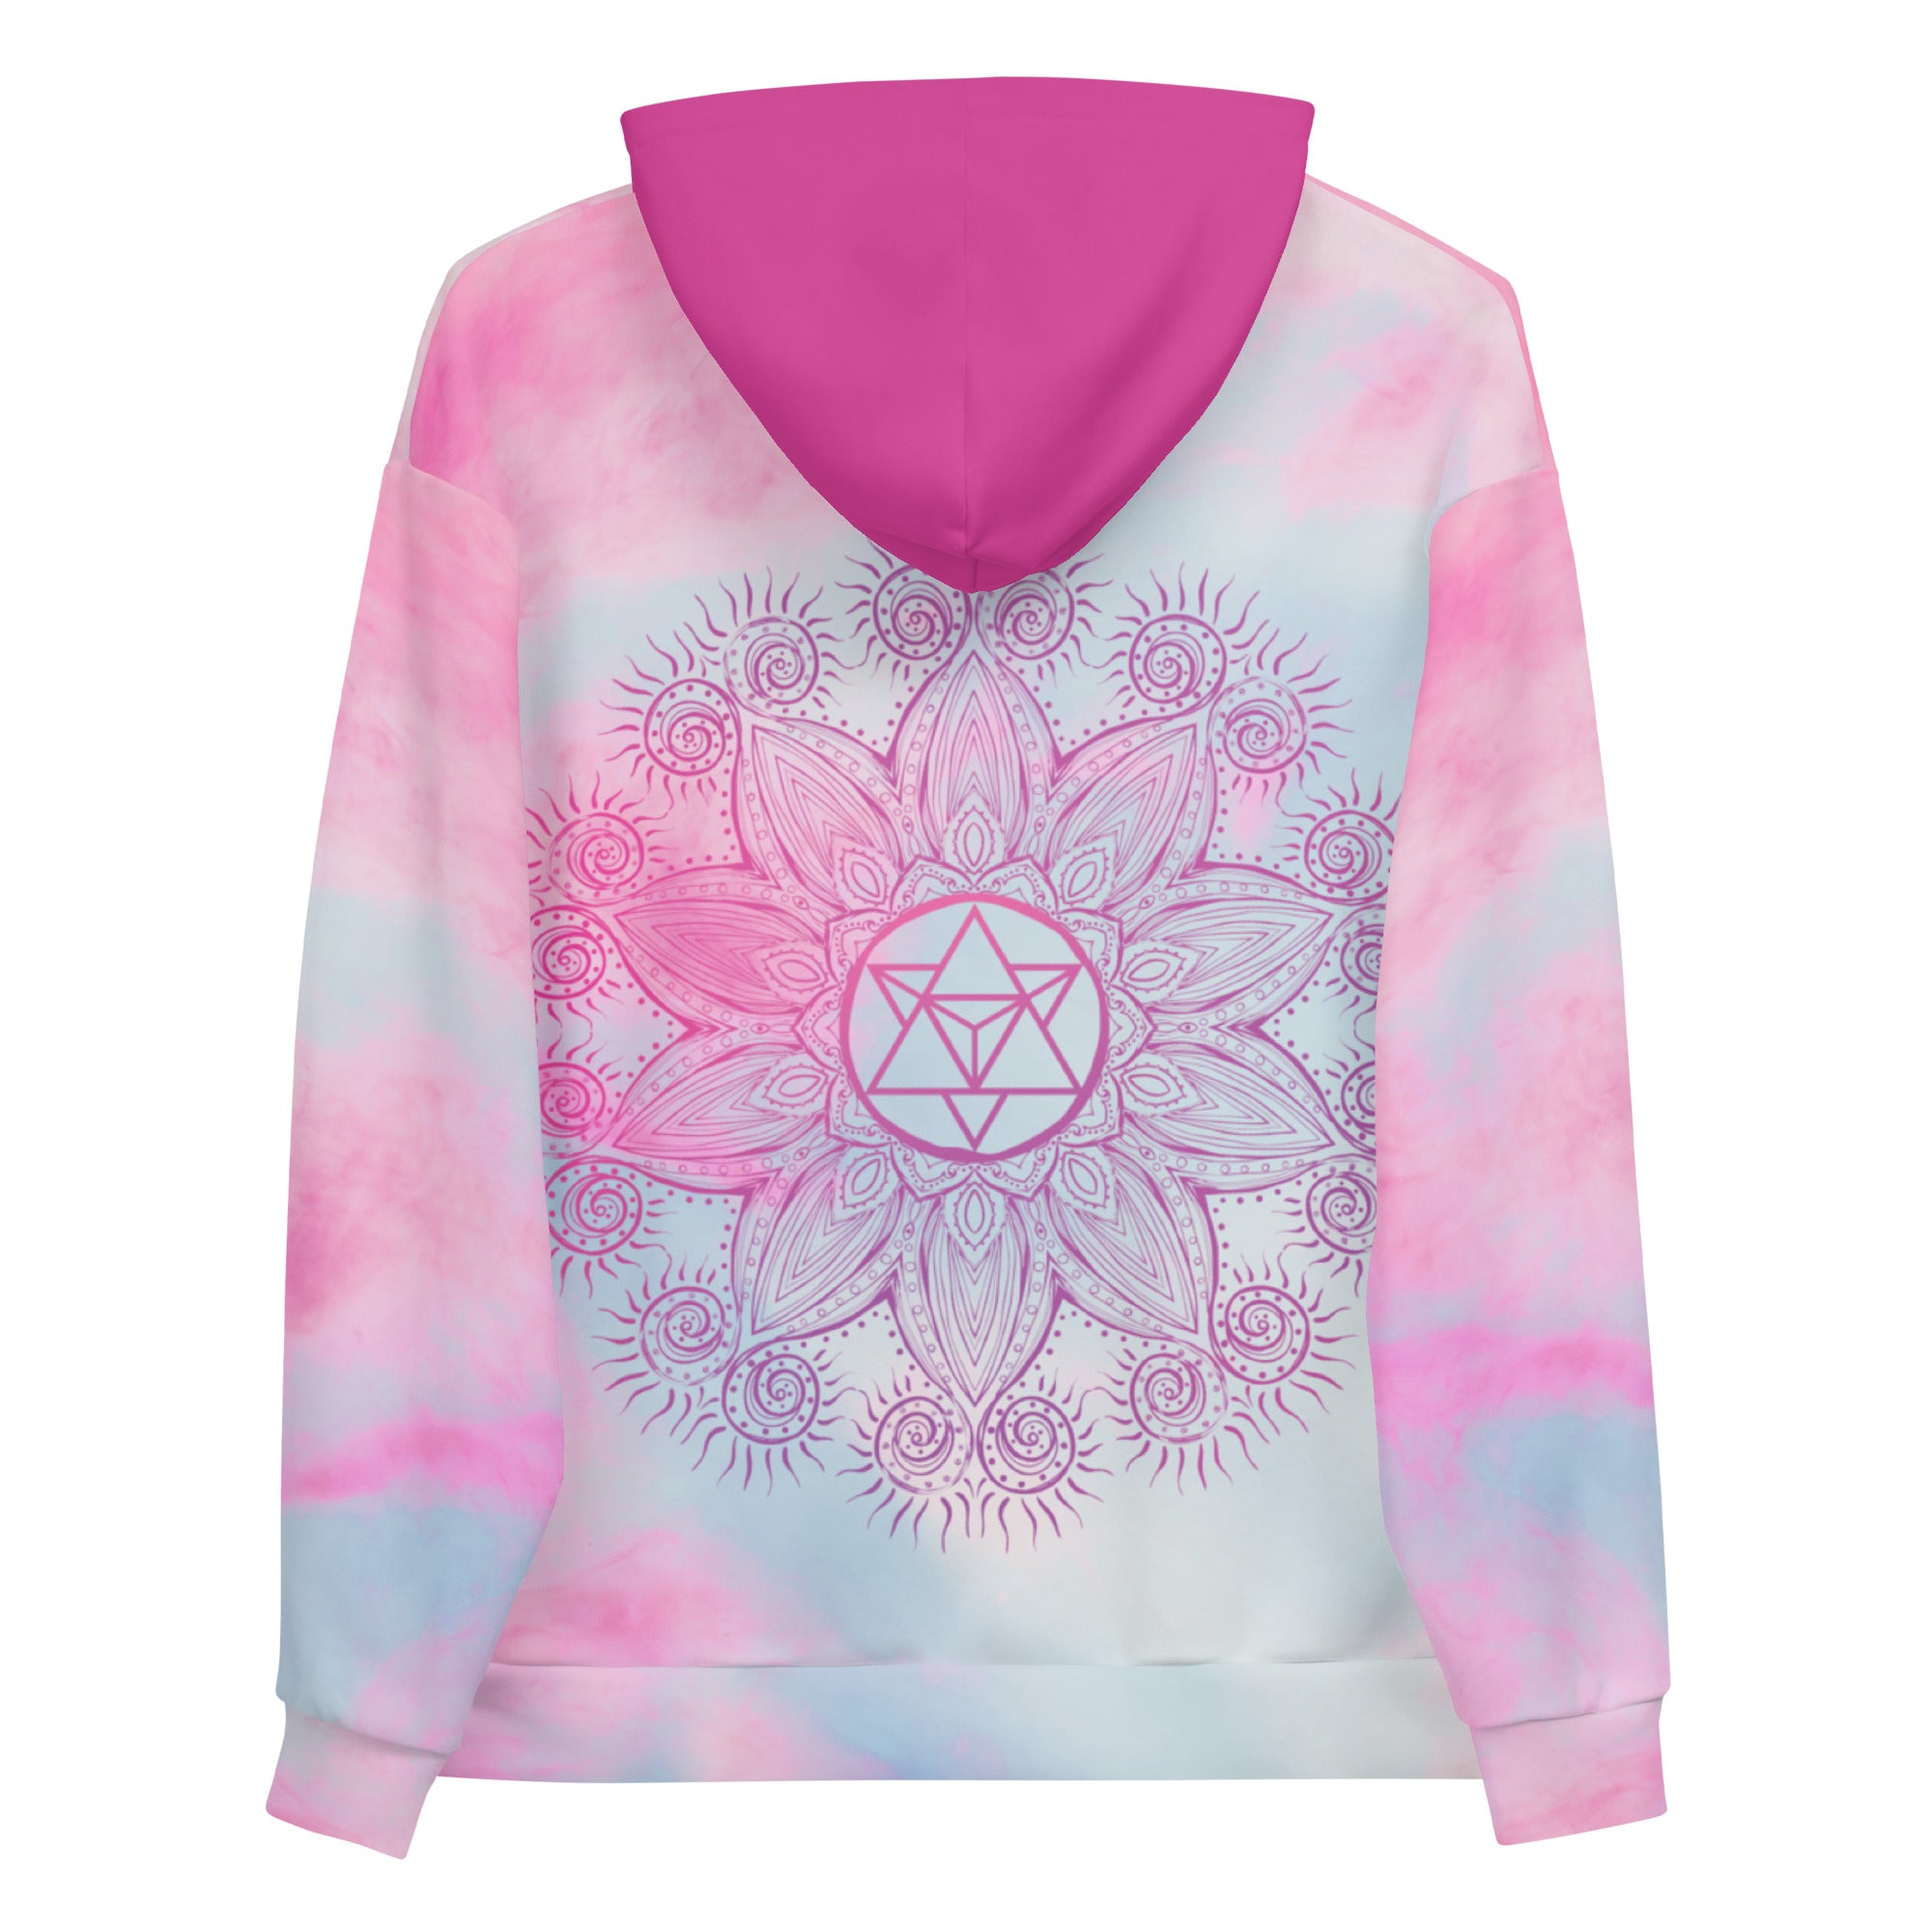 soul star chakra mandala design on hoodie front and back.  Hood is dark pink.  Background is pastels of  soft blue and pink. Designed by goddess swag.